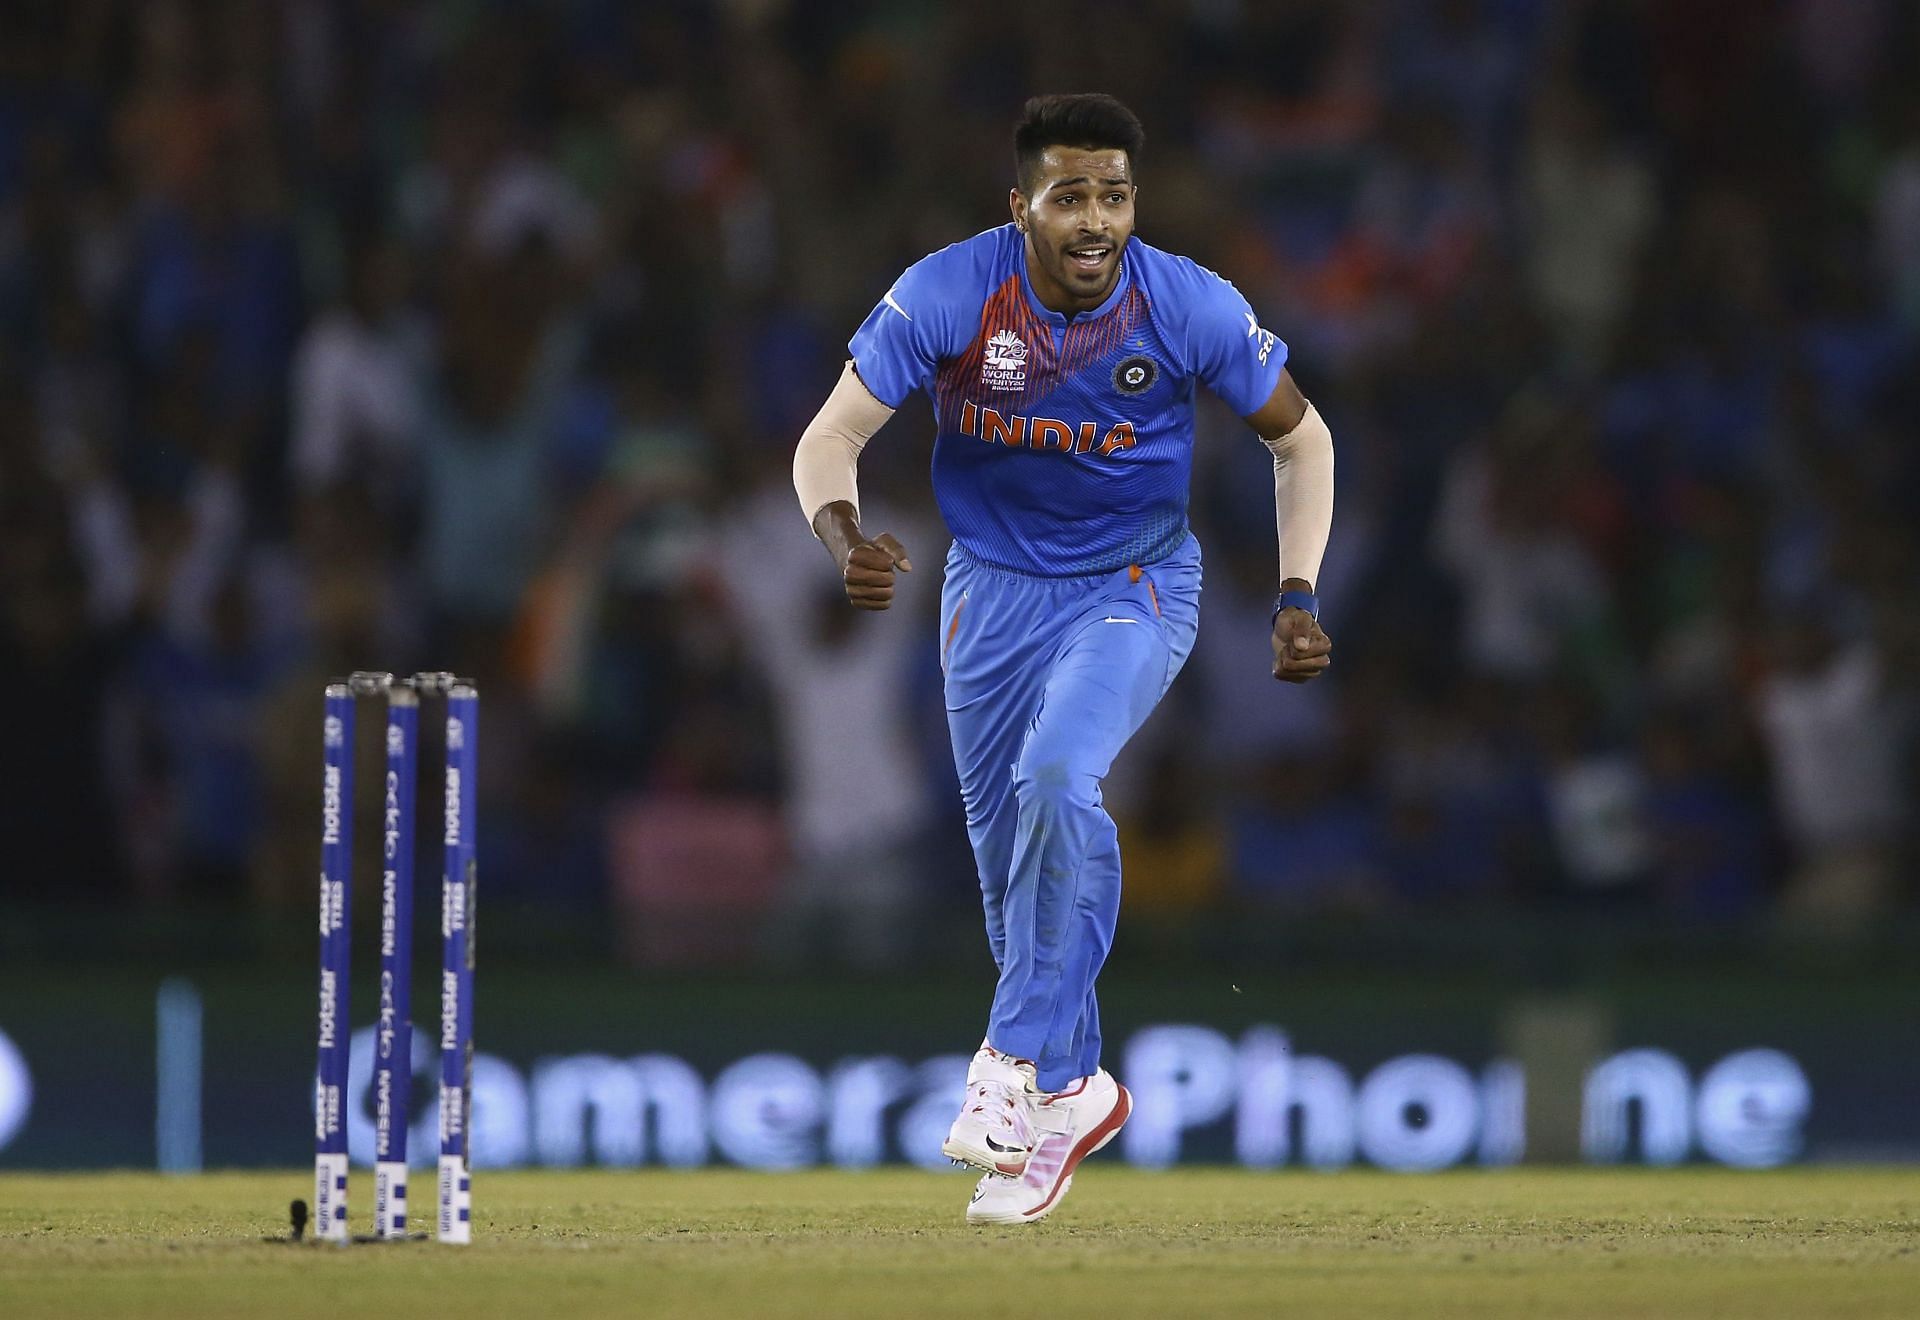 Pandya gave away just eight runs in 3.3 overs